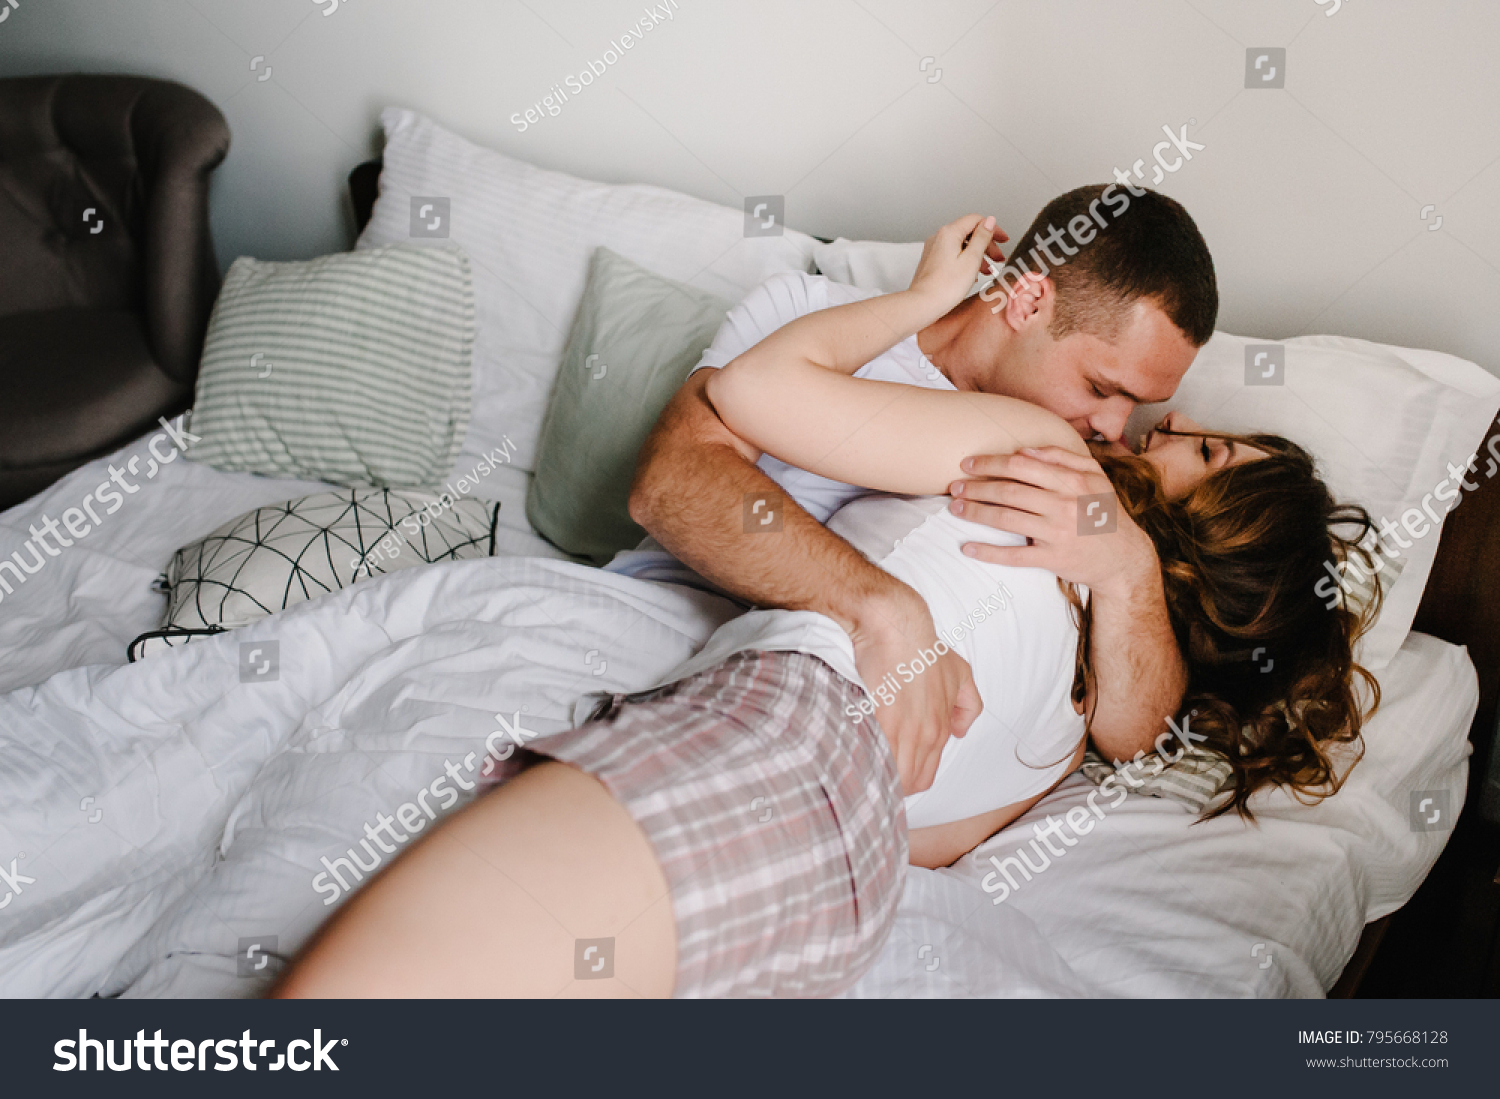 Man Caresses Woman Bed Love Couple